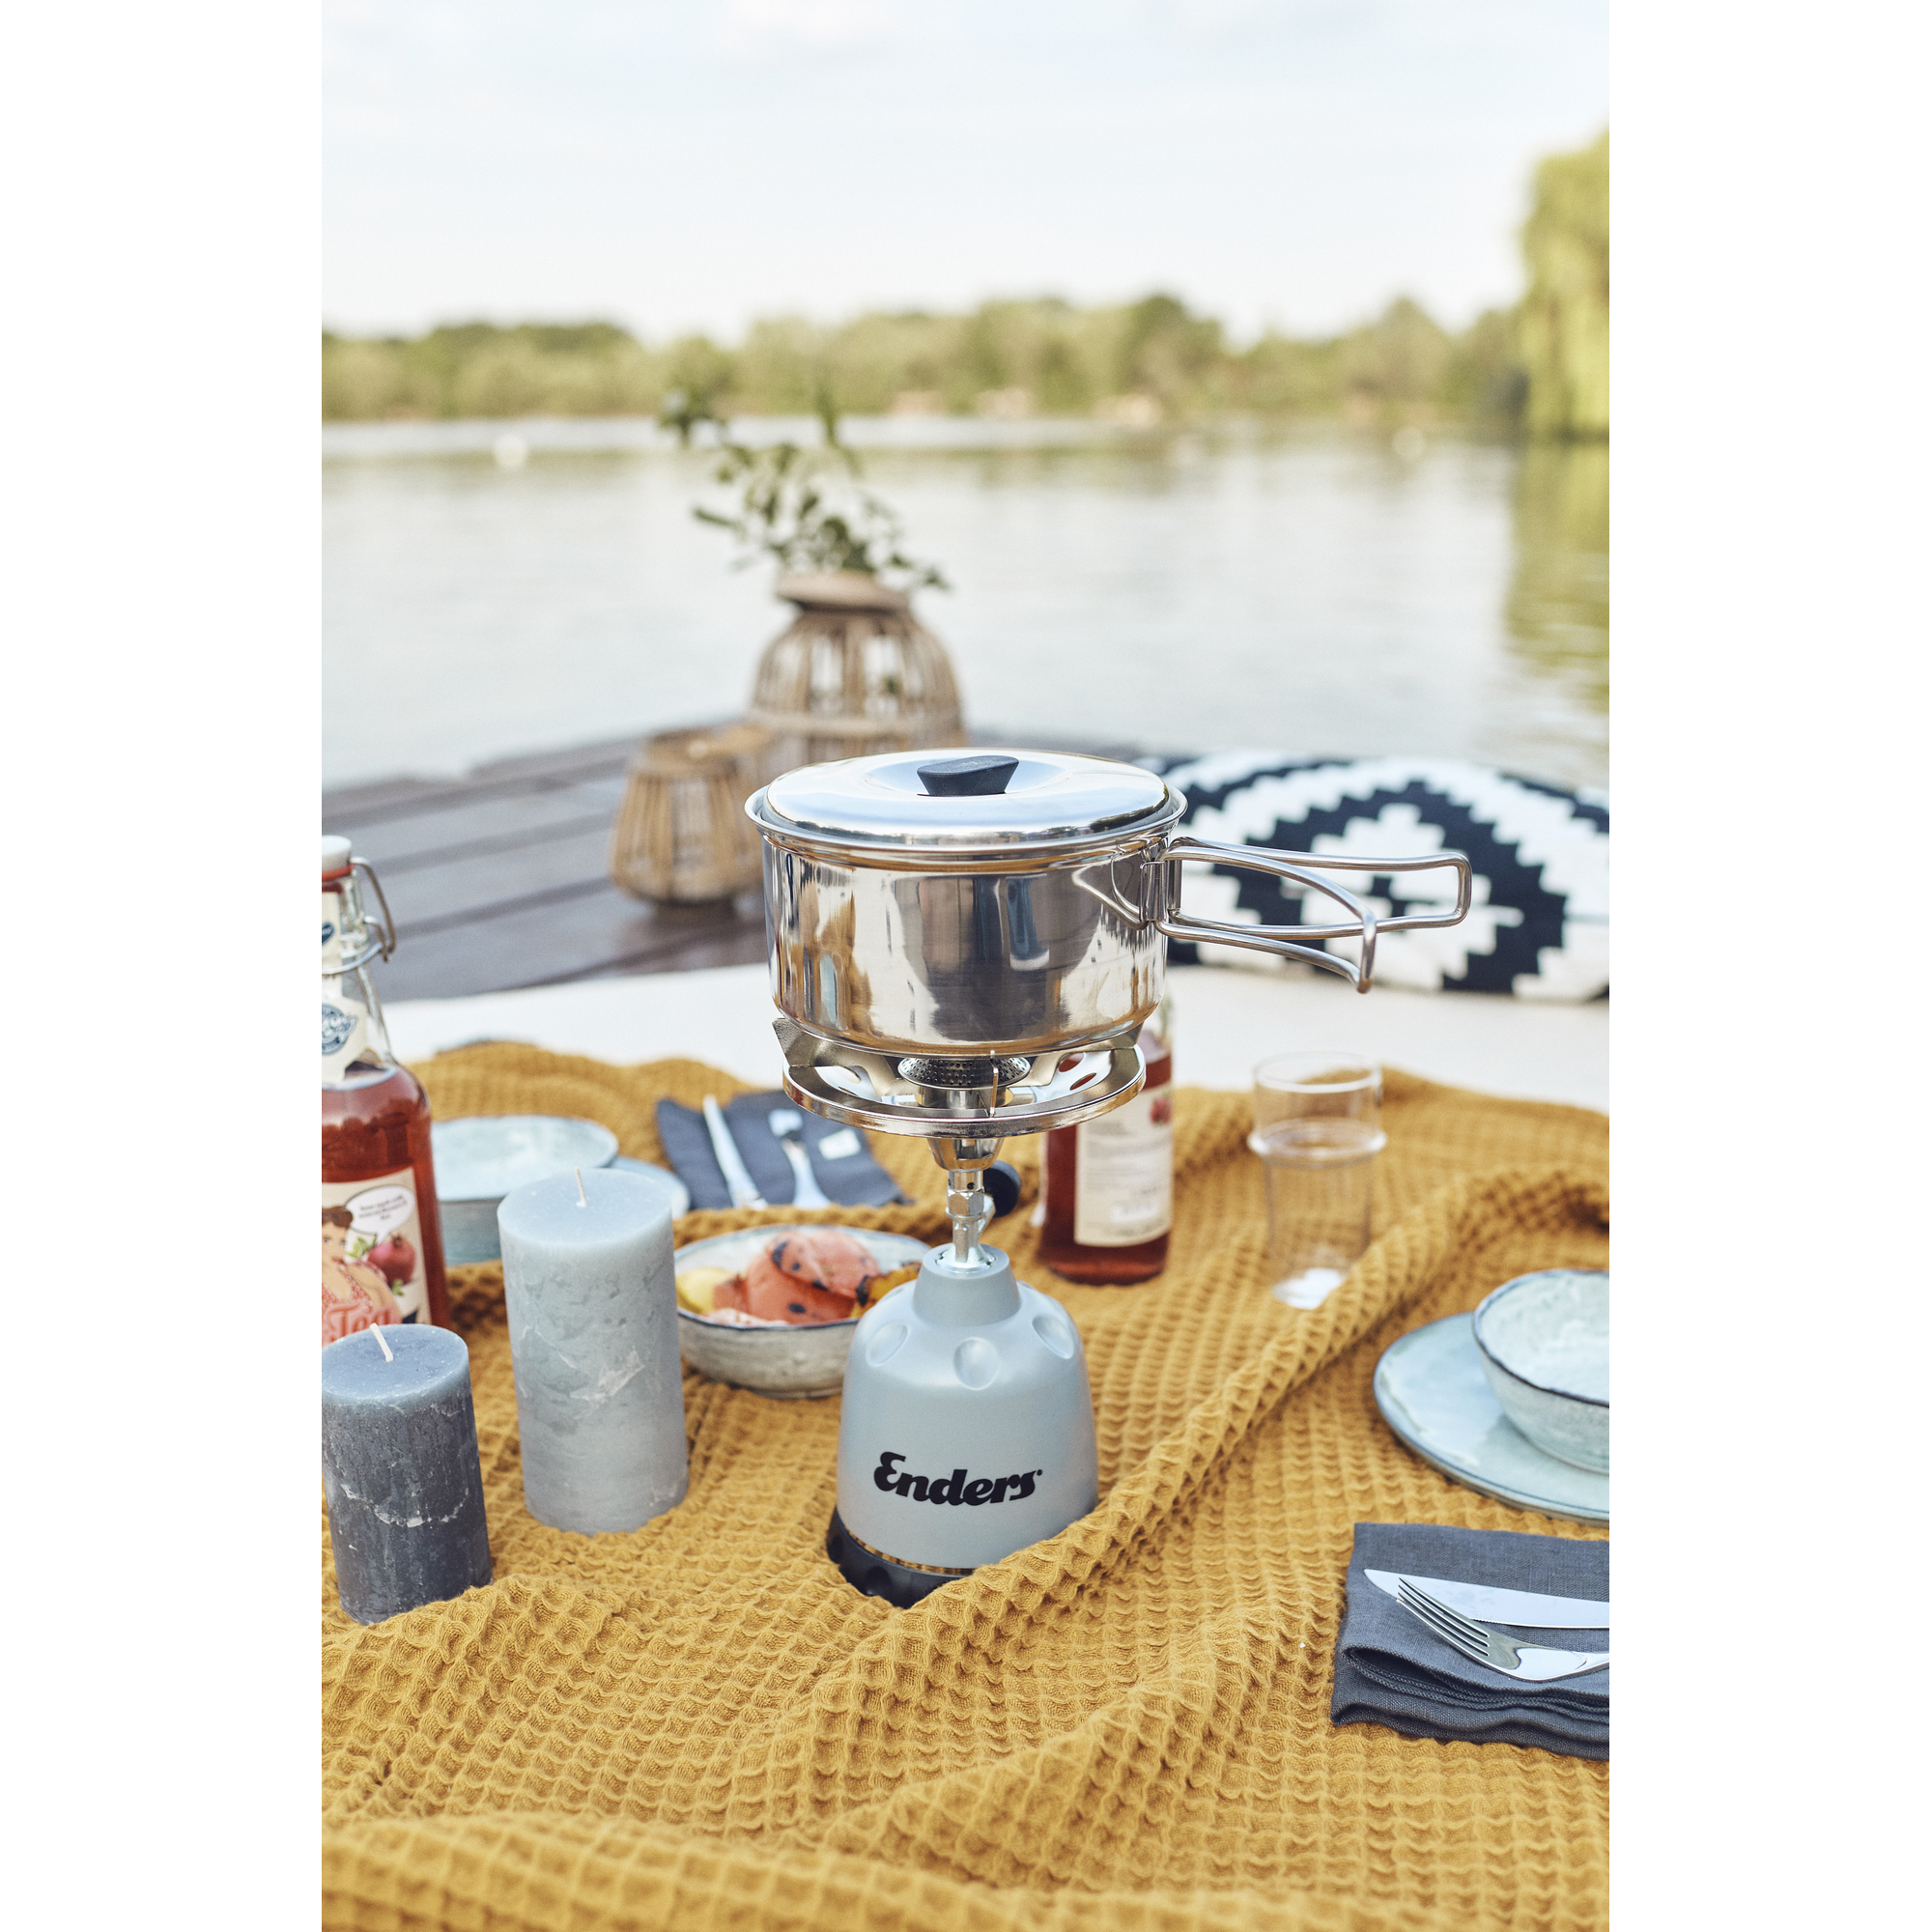 Camping-Topfset 'Culina' Edelstahl 3-teilig + product picture